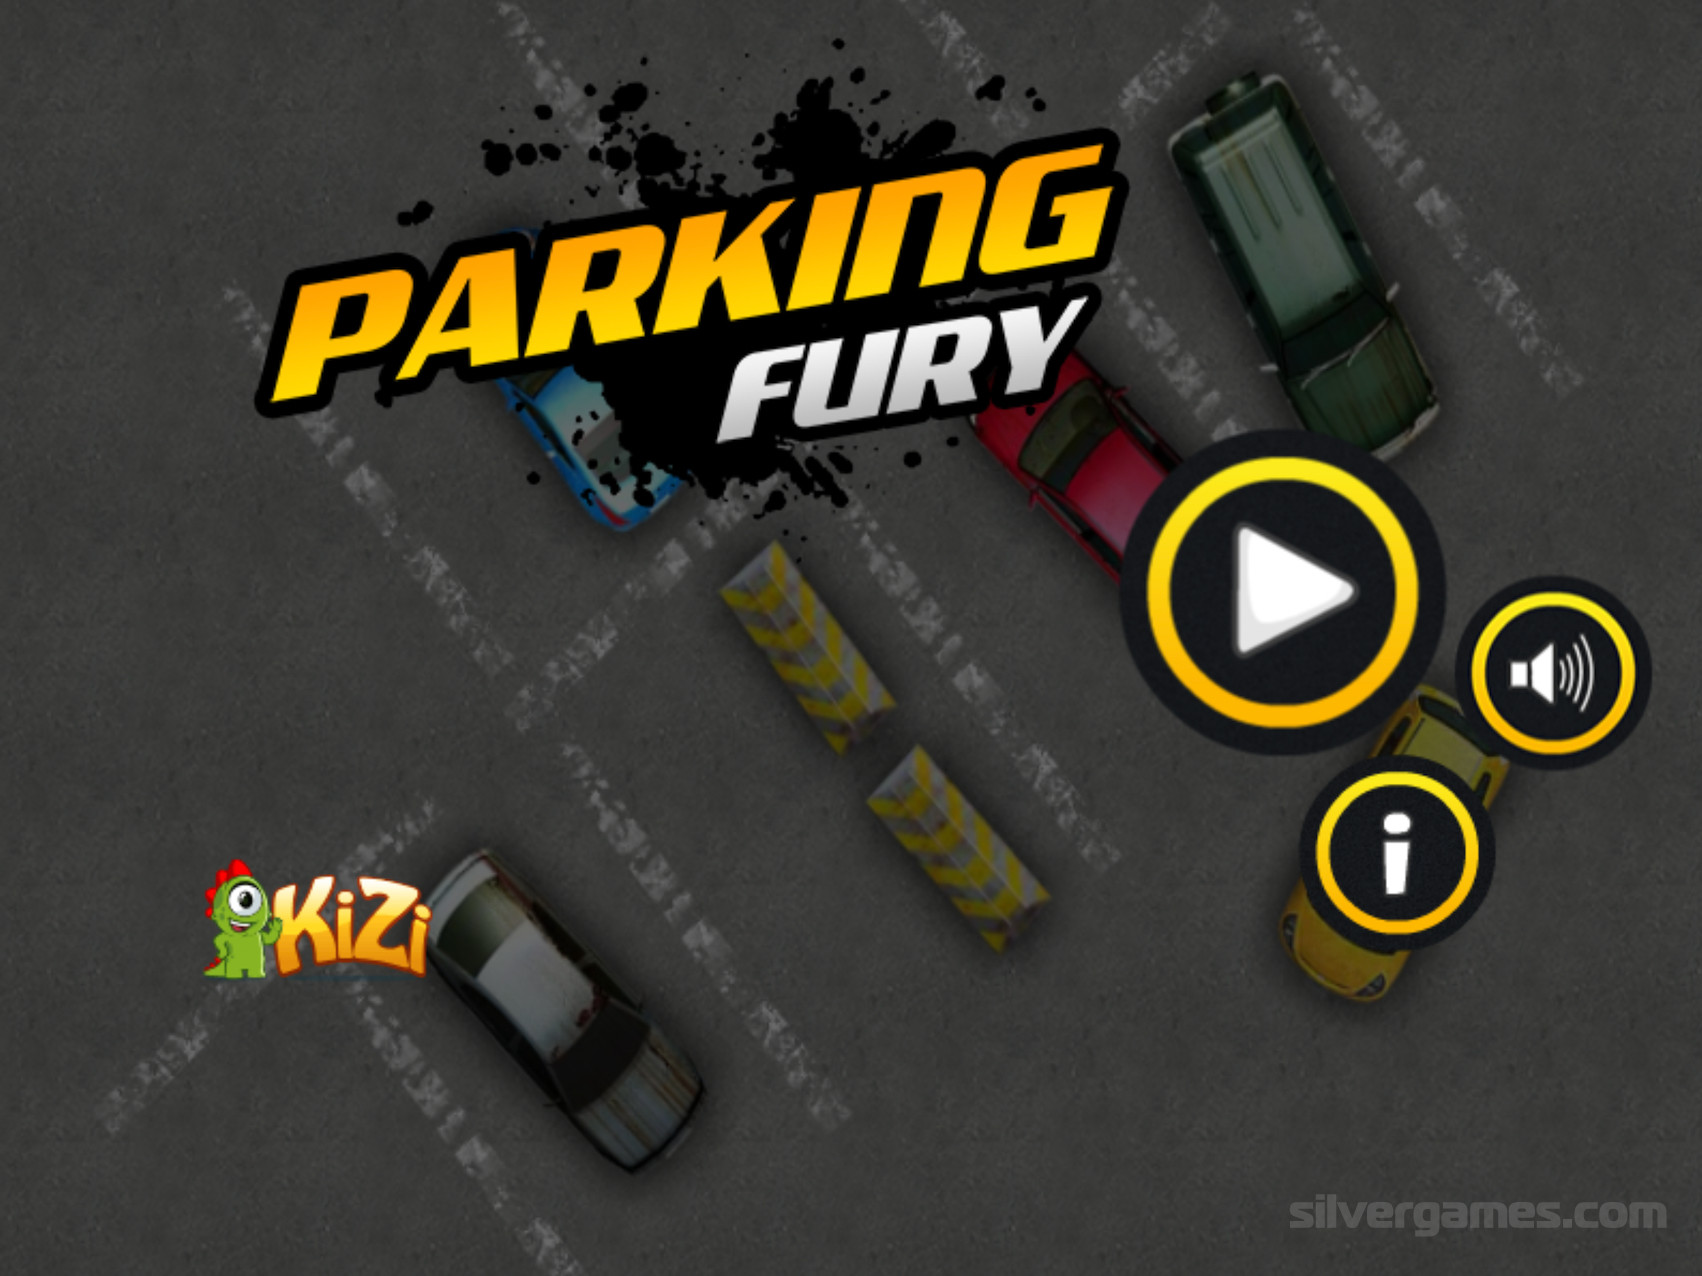 Parking Fury - Play Parking Fury Online on SilverGames